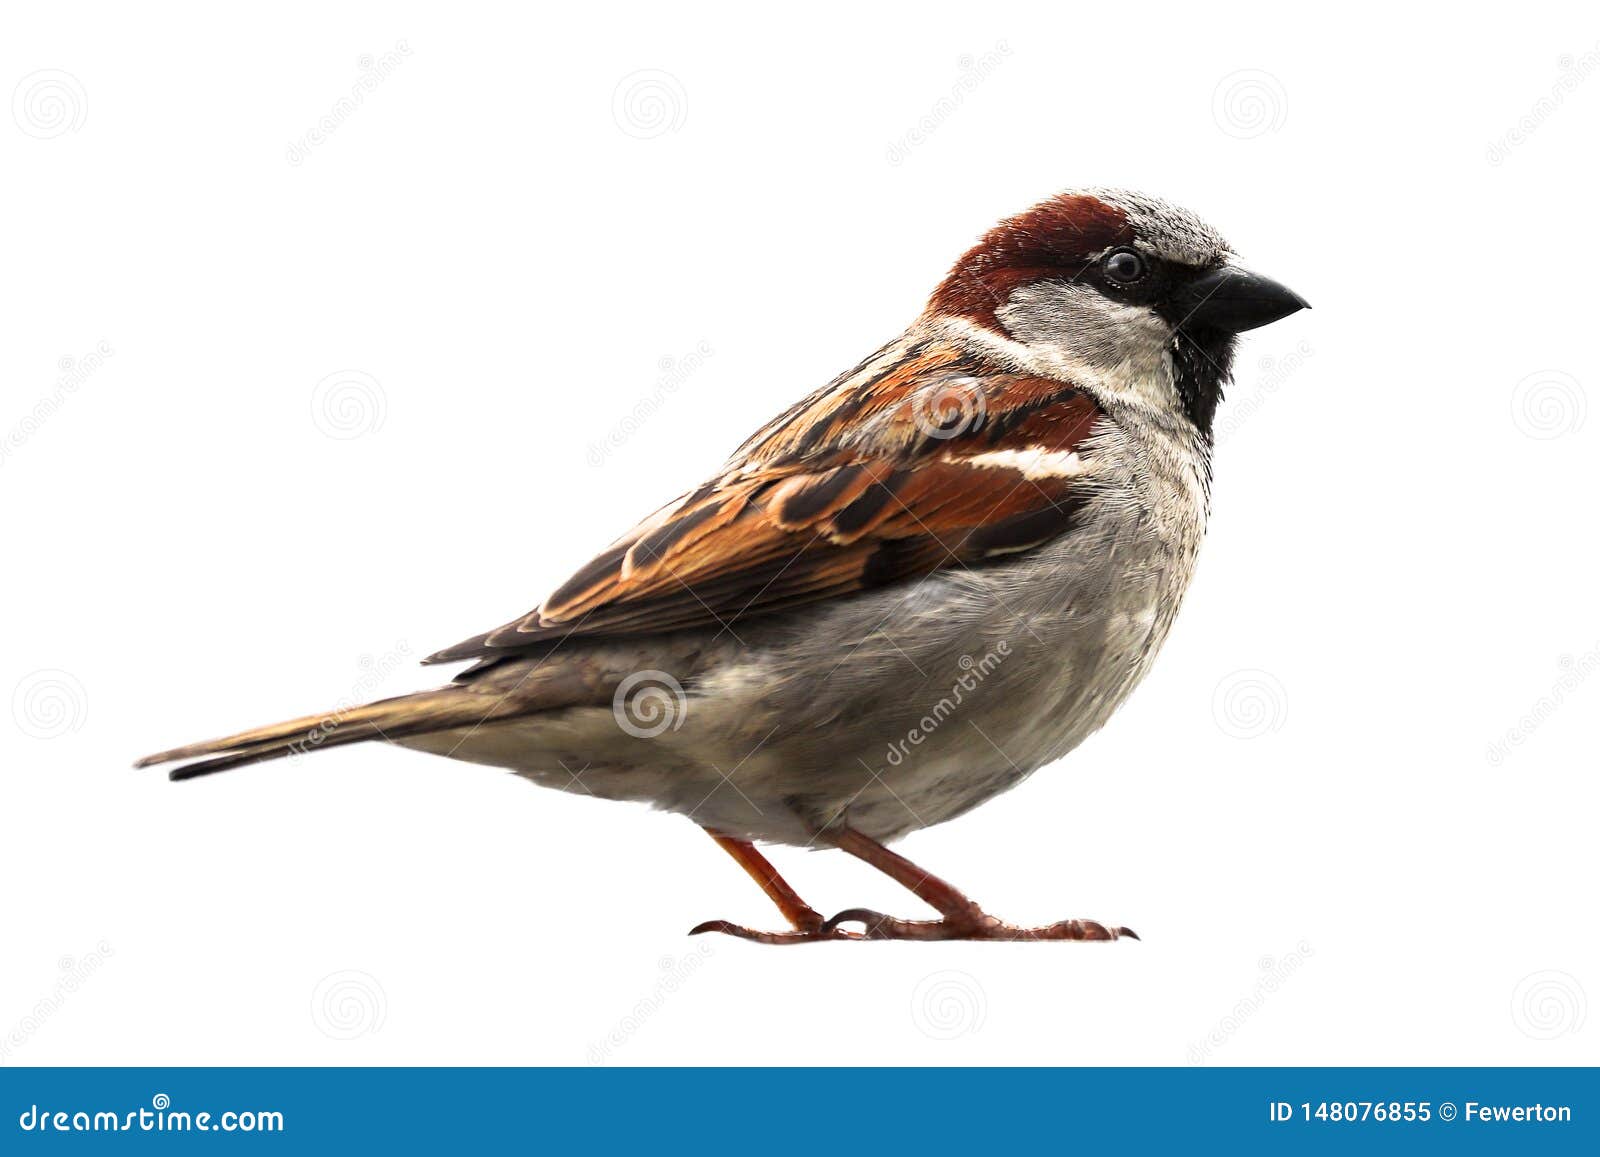 sparrow bird . sparrow songbird family passeridae sitting perching  cut out on white background close up photo.